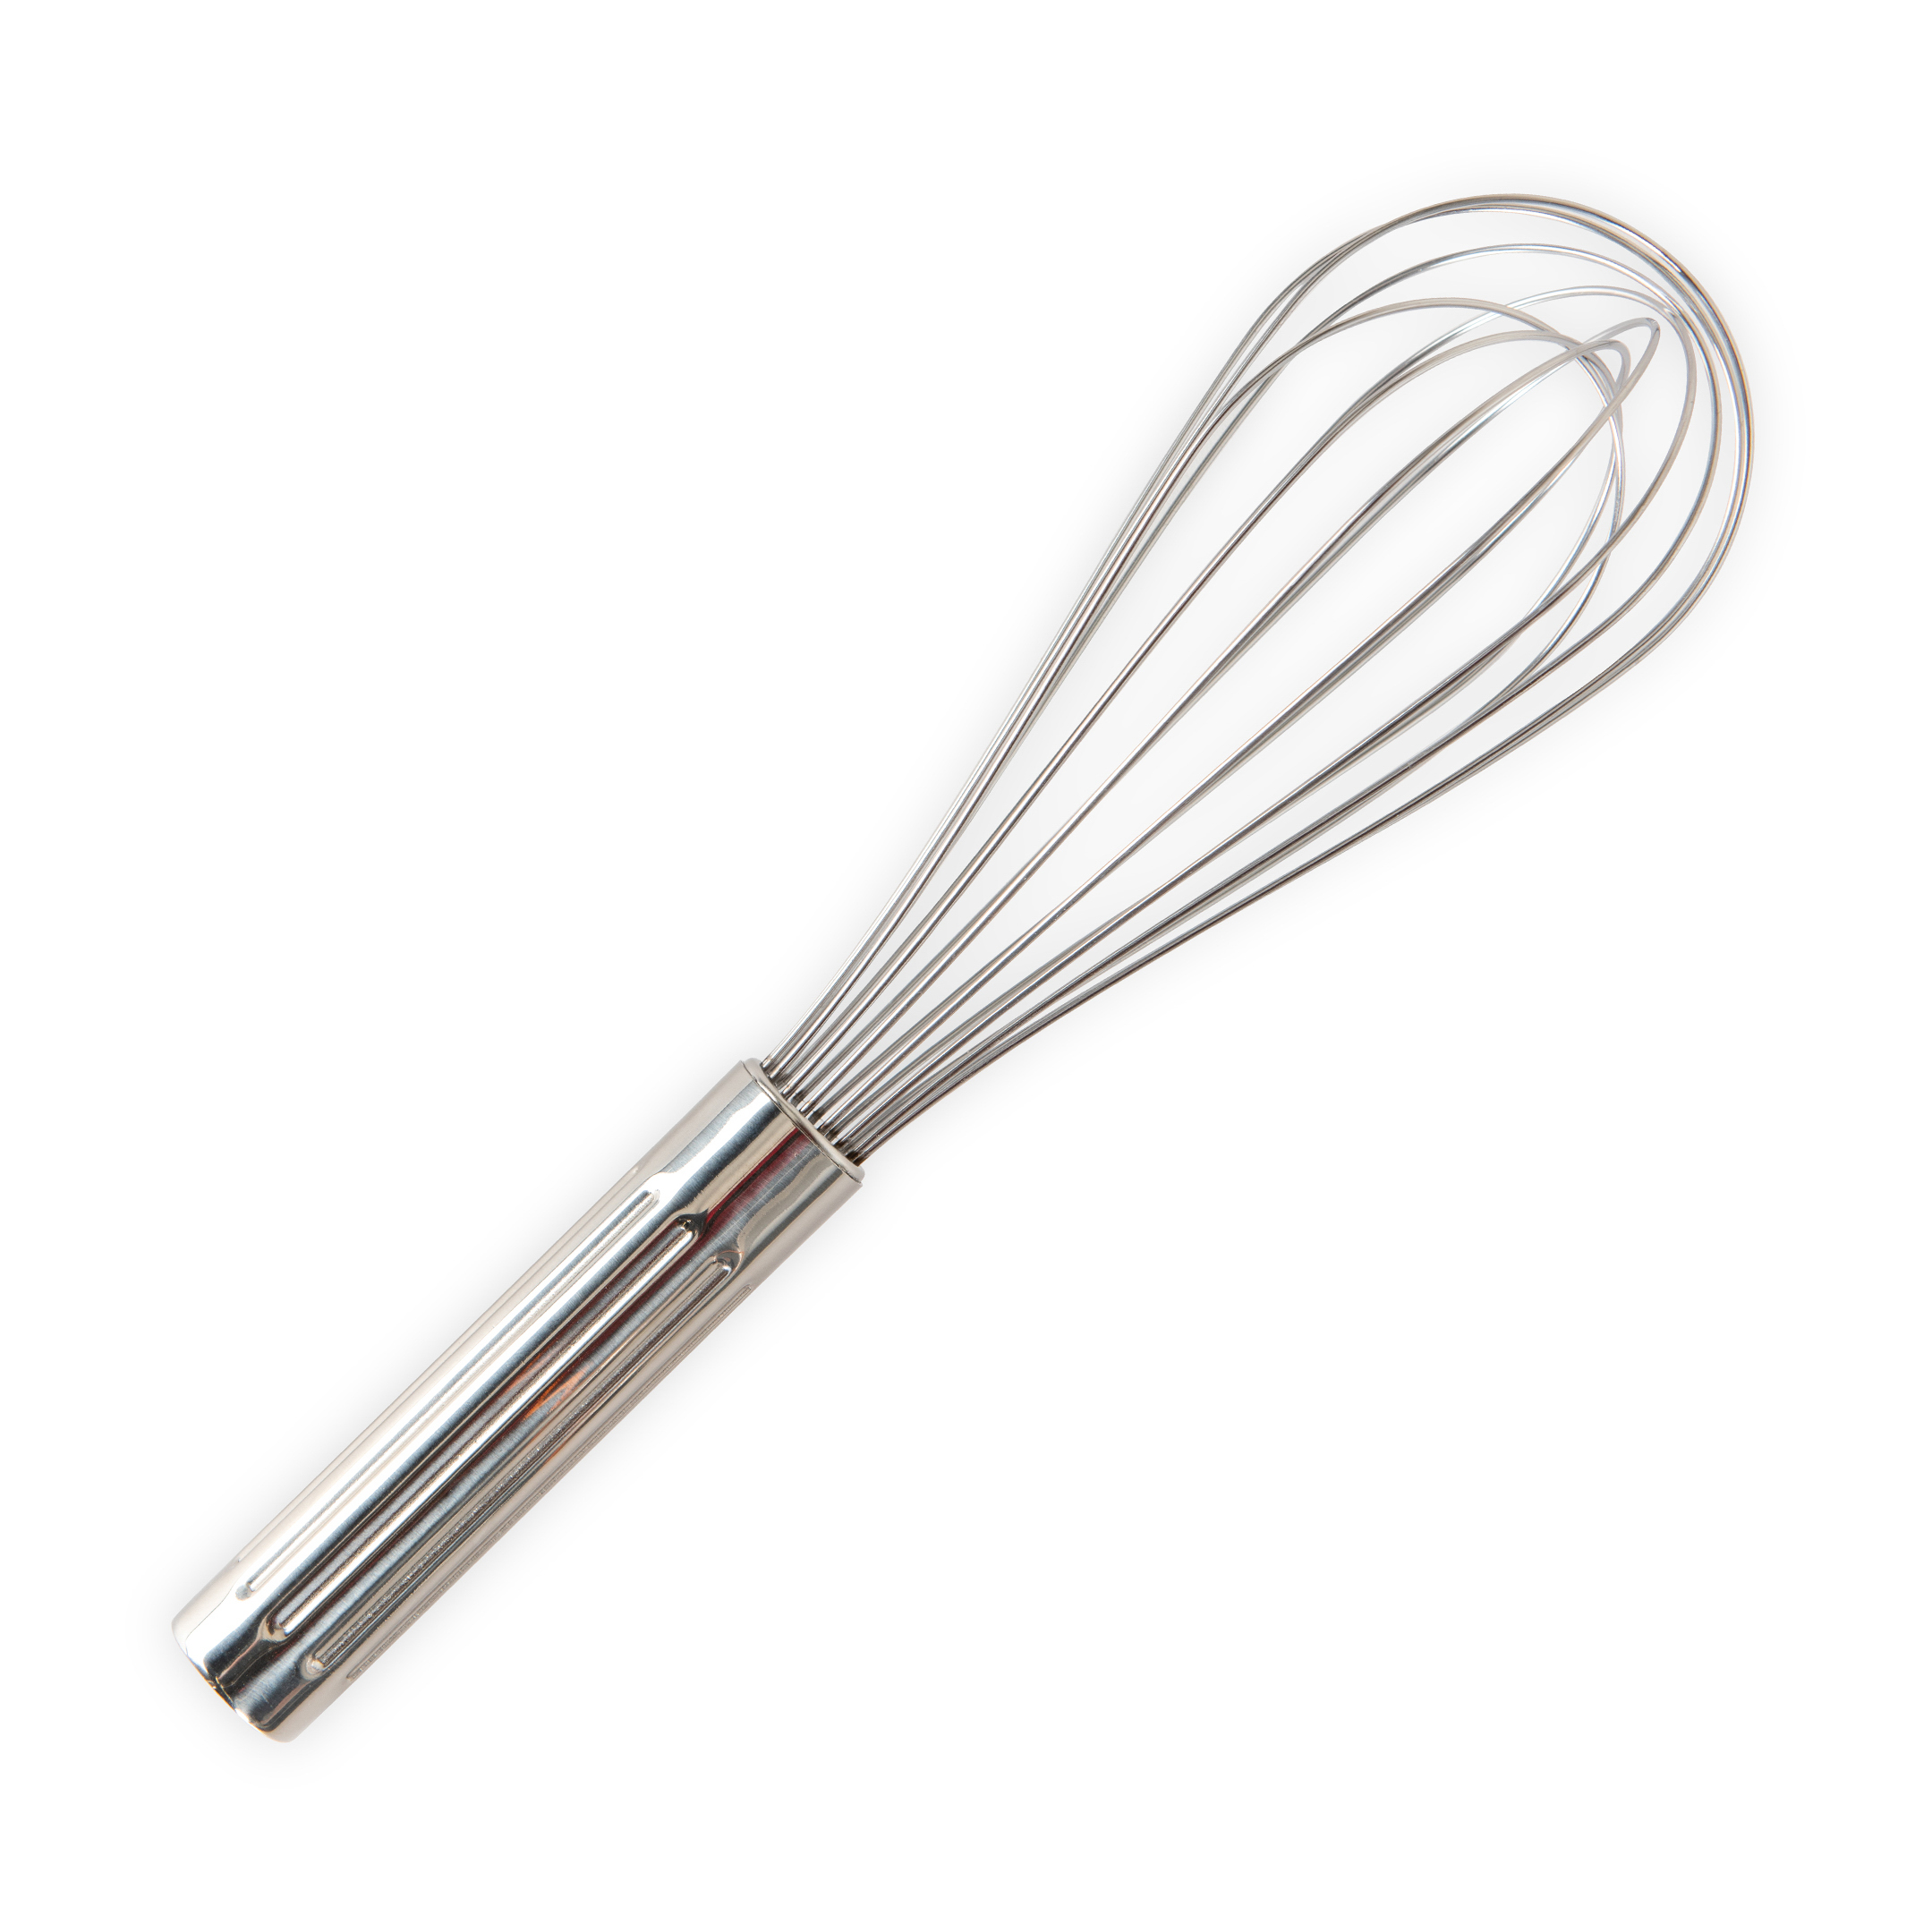 https://www.nordicnest.com/assets/blobs/nordic-ware-nordic-ware-balloon-whisk-large/515998-01_1_ProductImageMain-b0286b4f64.jpeg